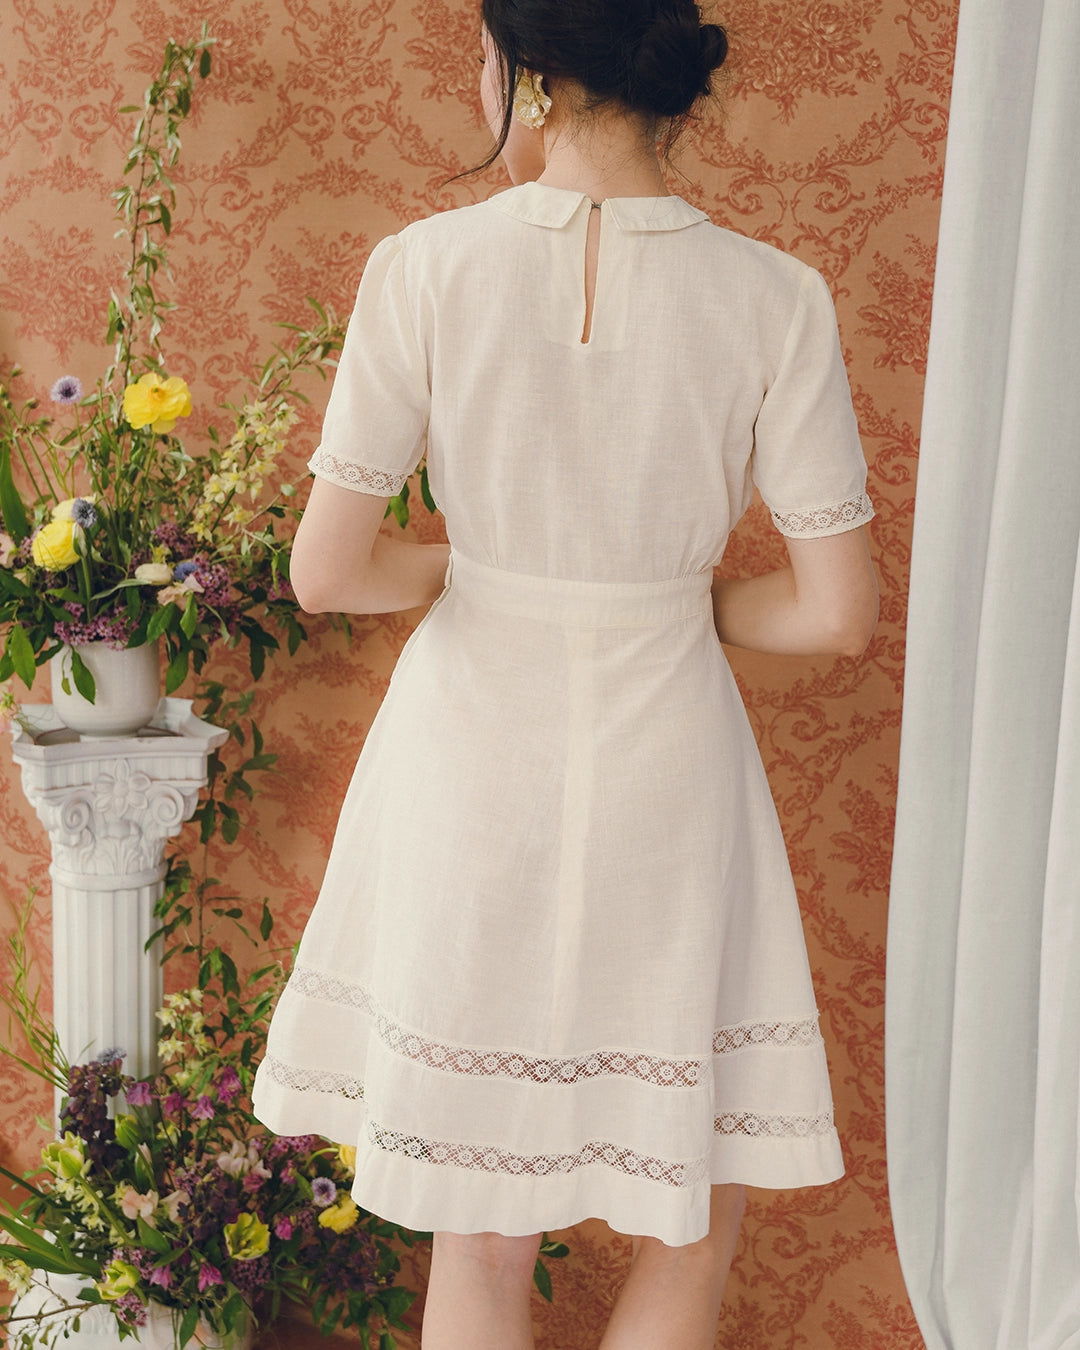 VINTAGE 1940s PETER PAN COLLAR DRESS WITH LACE INSETS